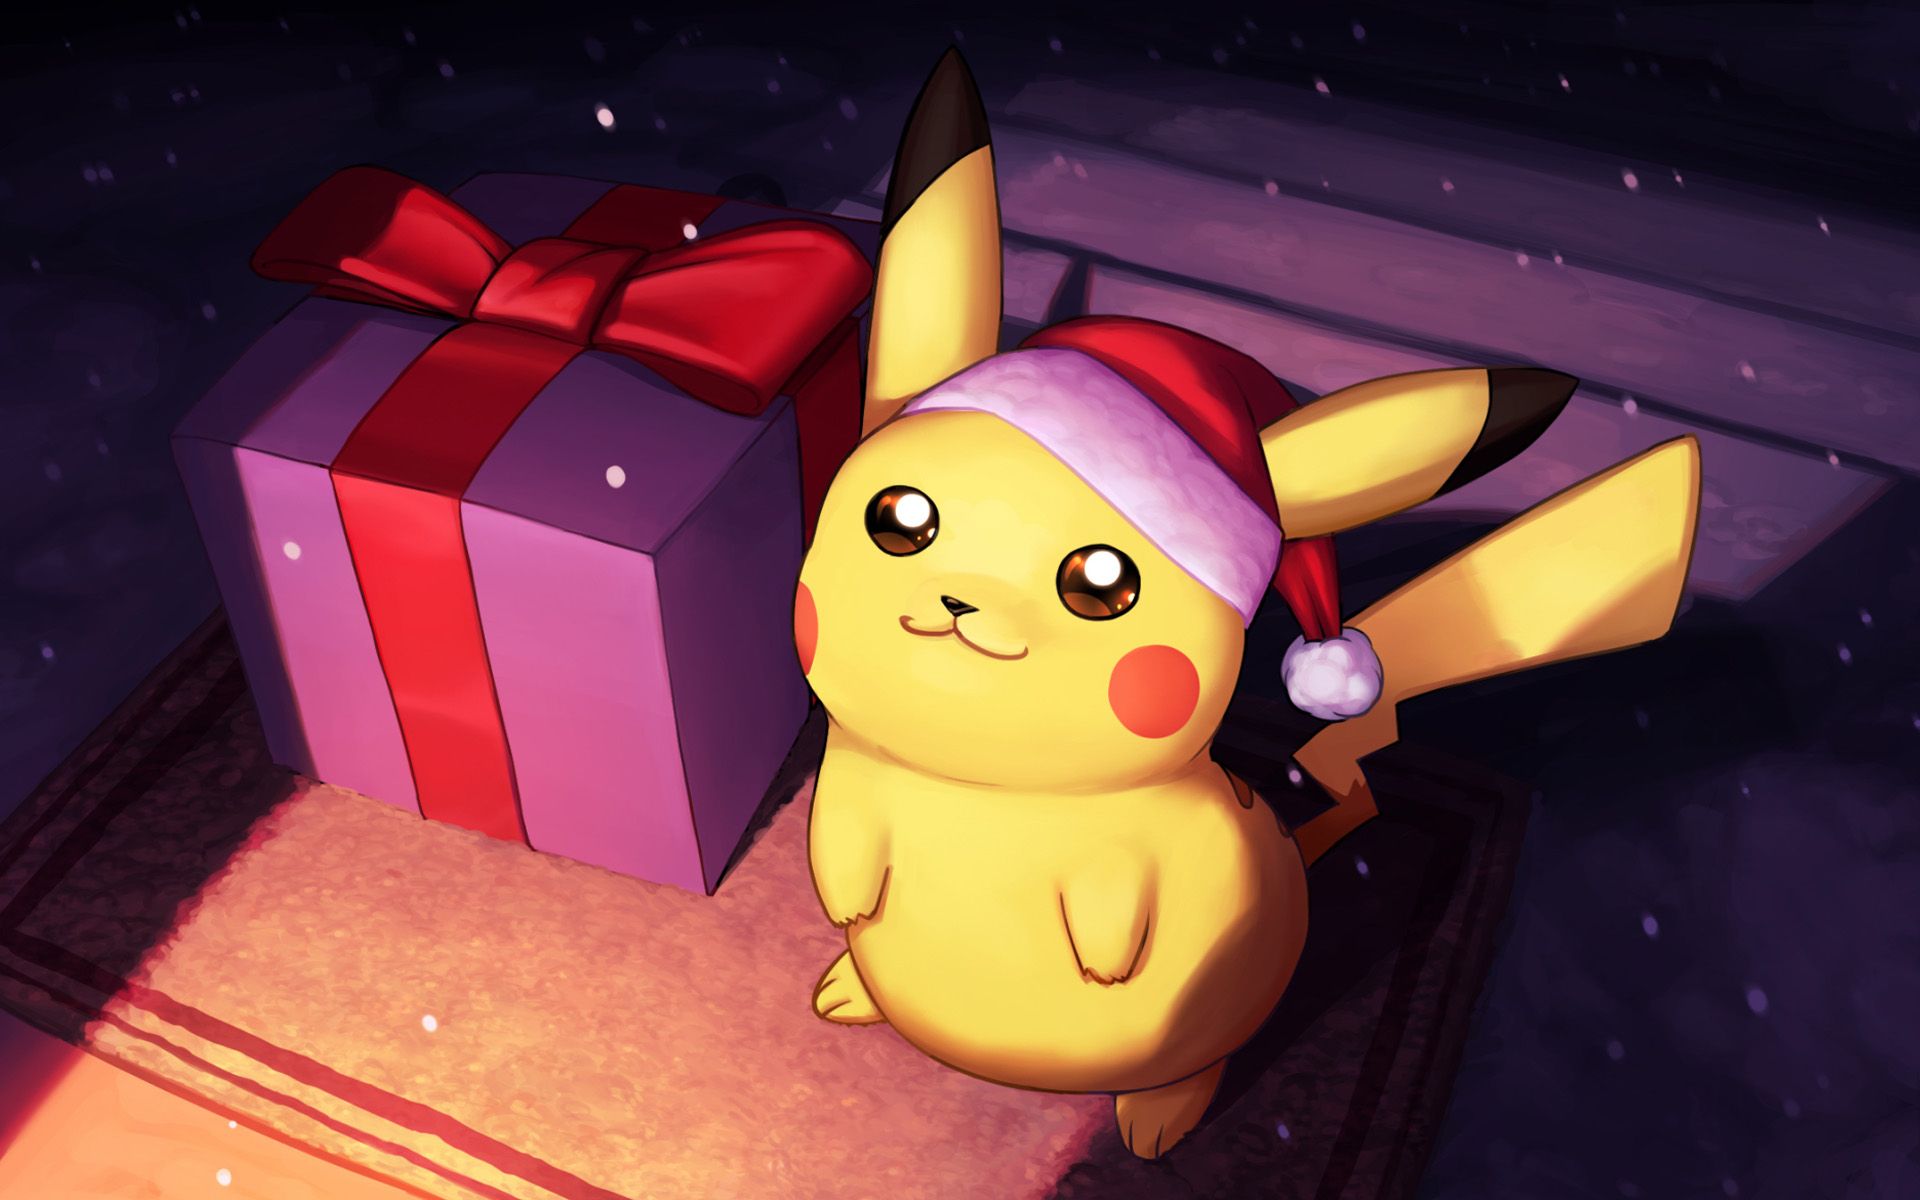 Download wallpaper Santa Pikachu, Happy New Year, Pokemon, Pikachu, chubby rodent, artwork, gifts boxes for desktop with resolution 1920x1200. High Quality HD picture wallpaper